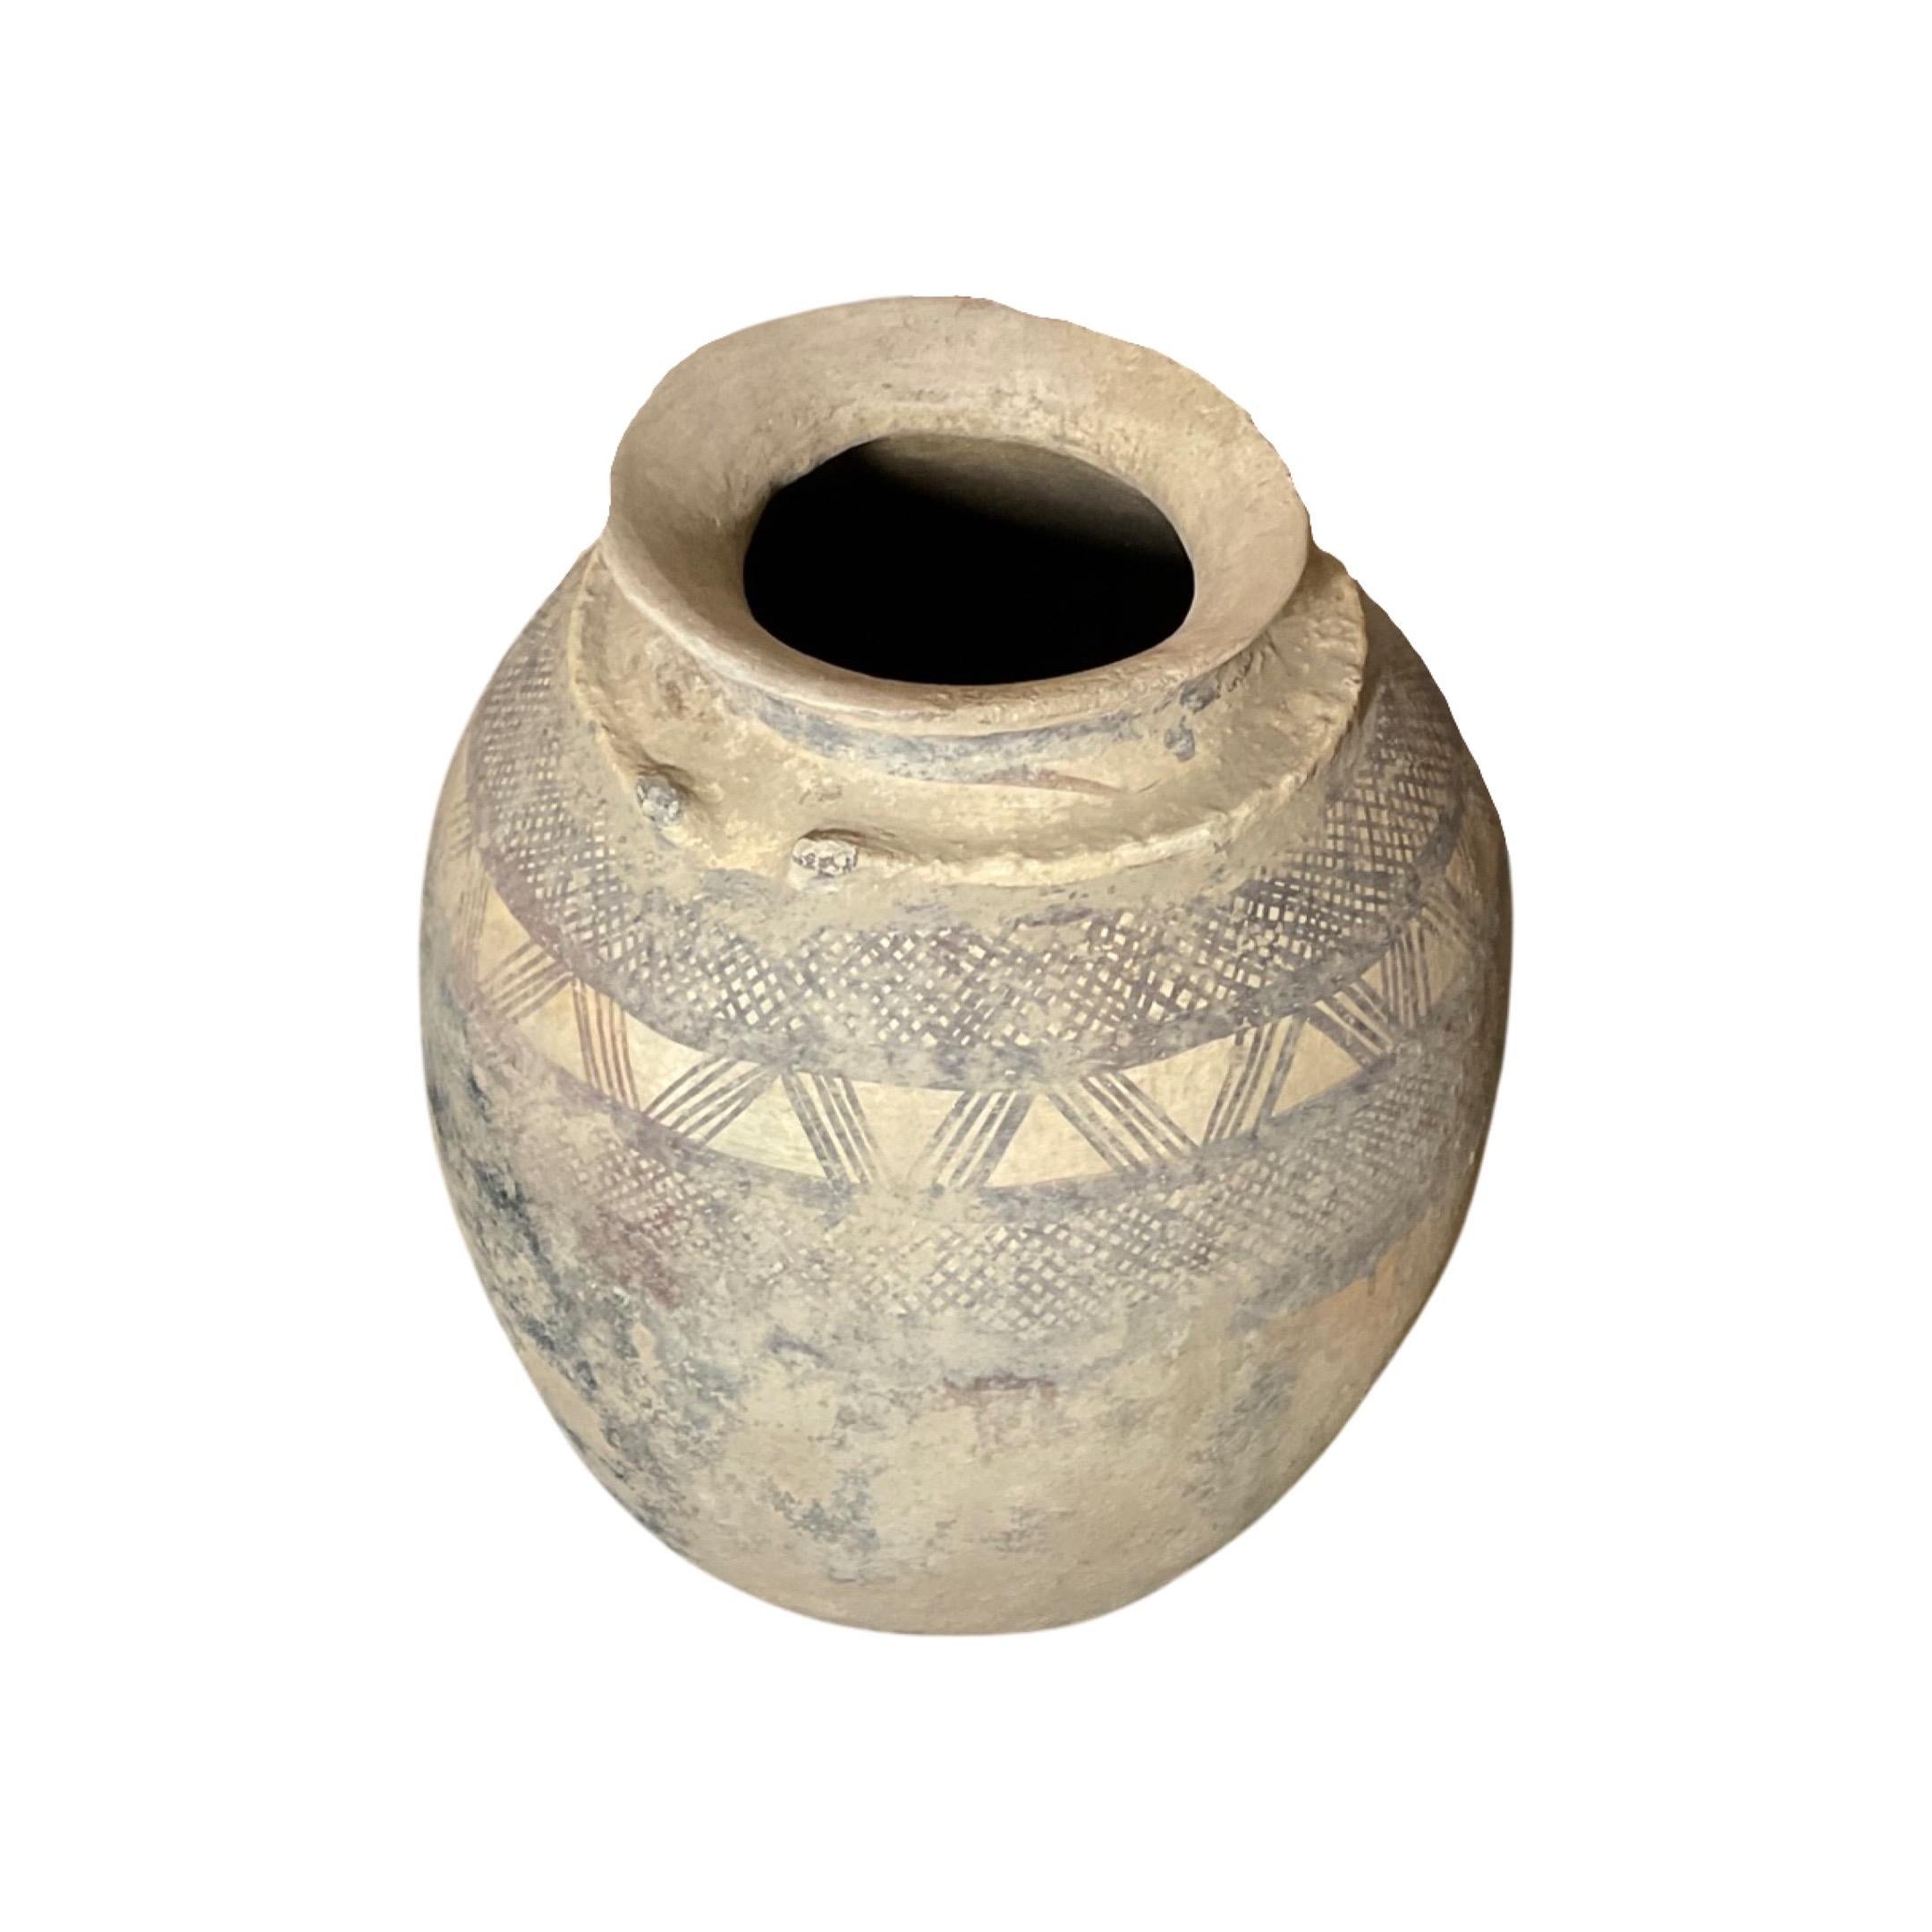 North African Terracotta Vessel In Good Condition For Sale In Dallas, TX